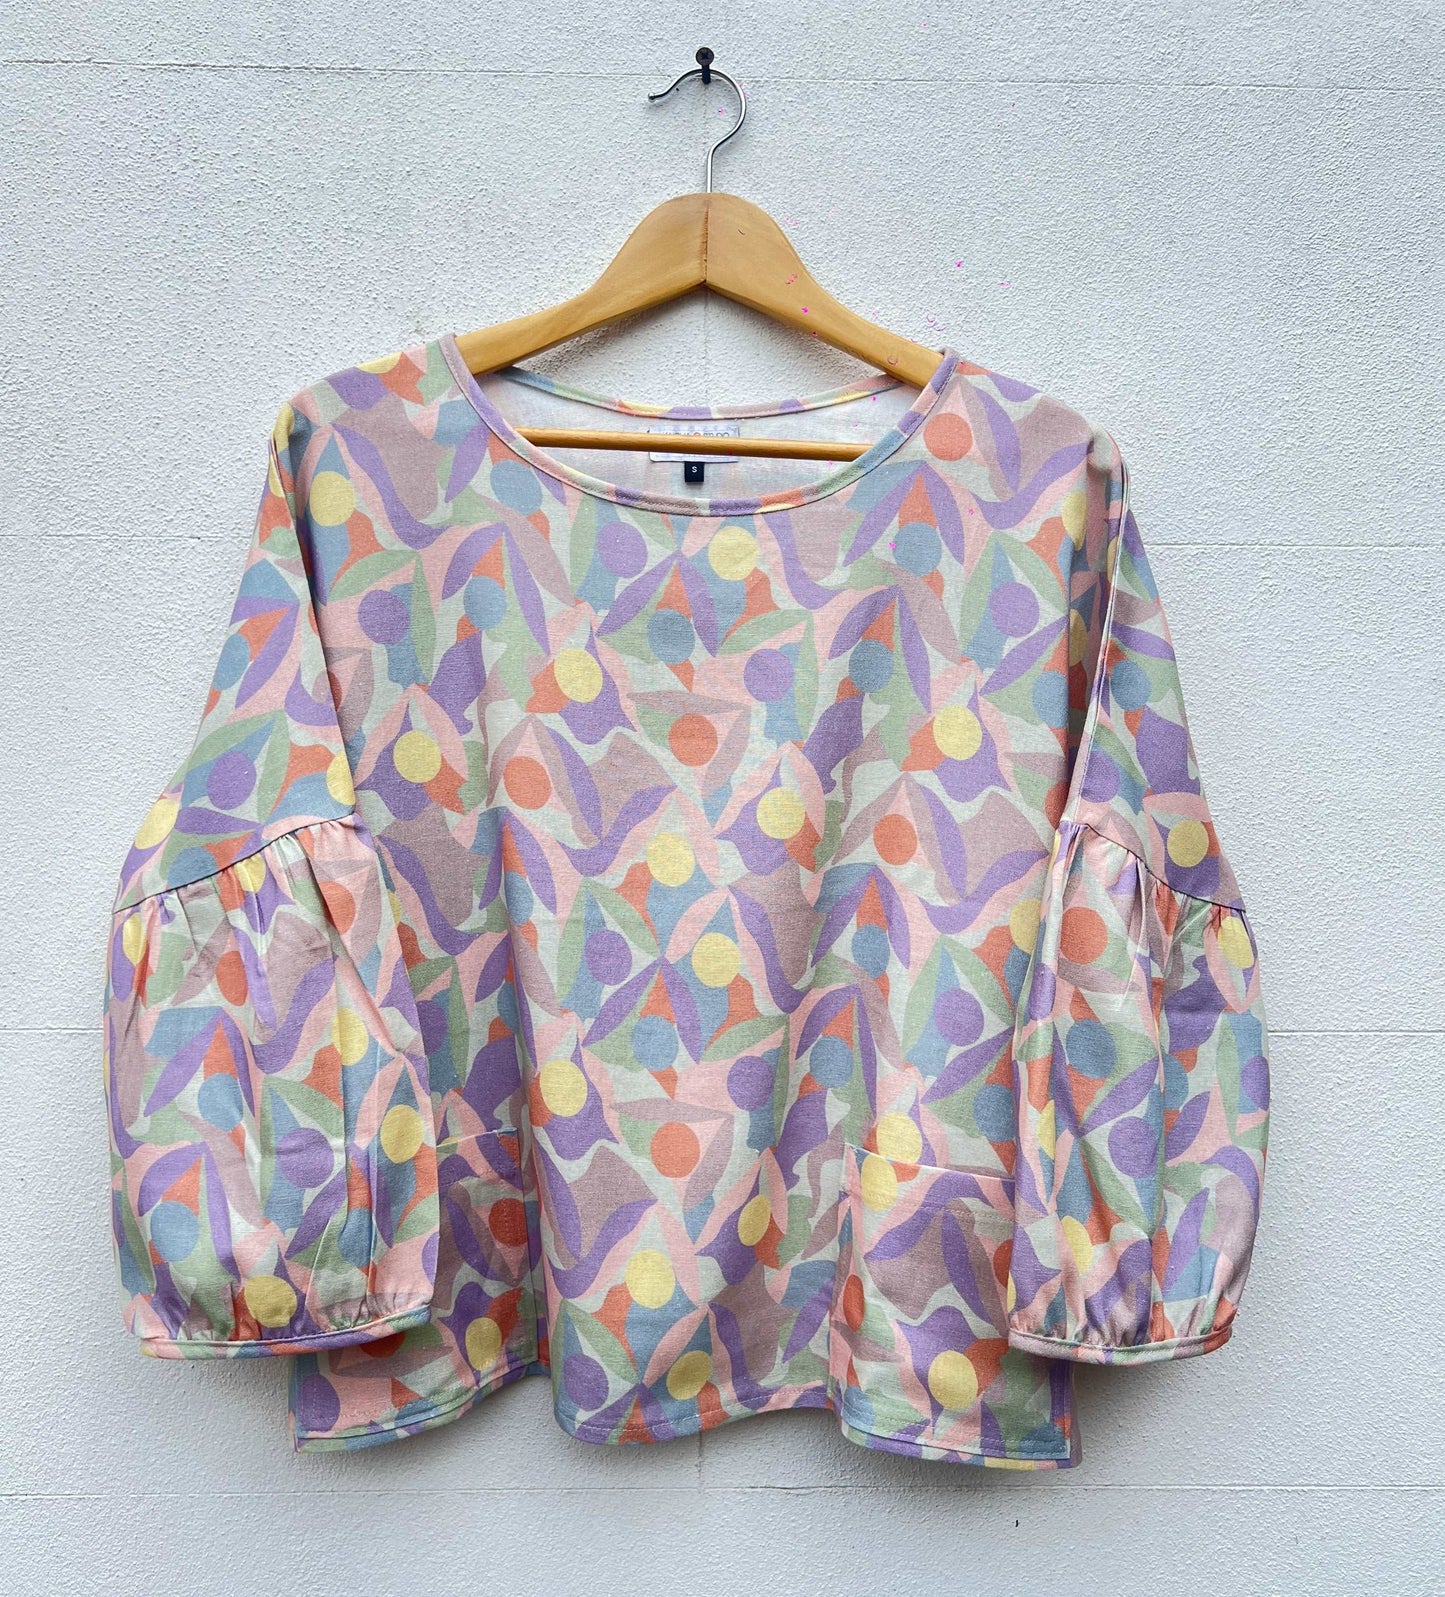 Pastel coloured patterned cloud blouse with pockets